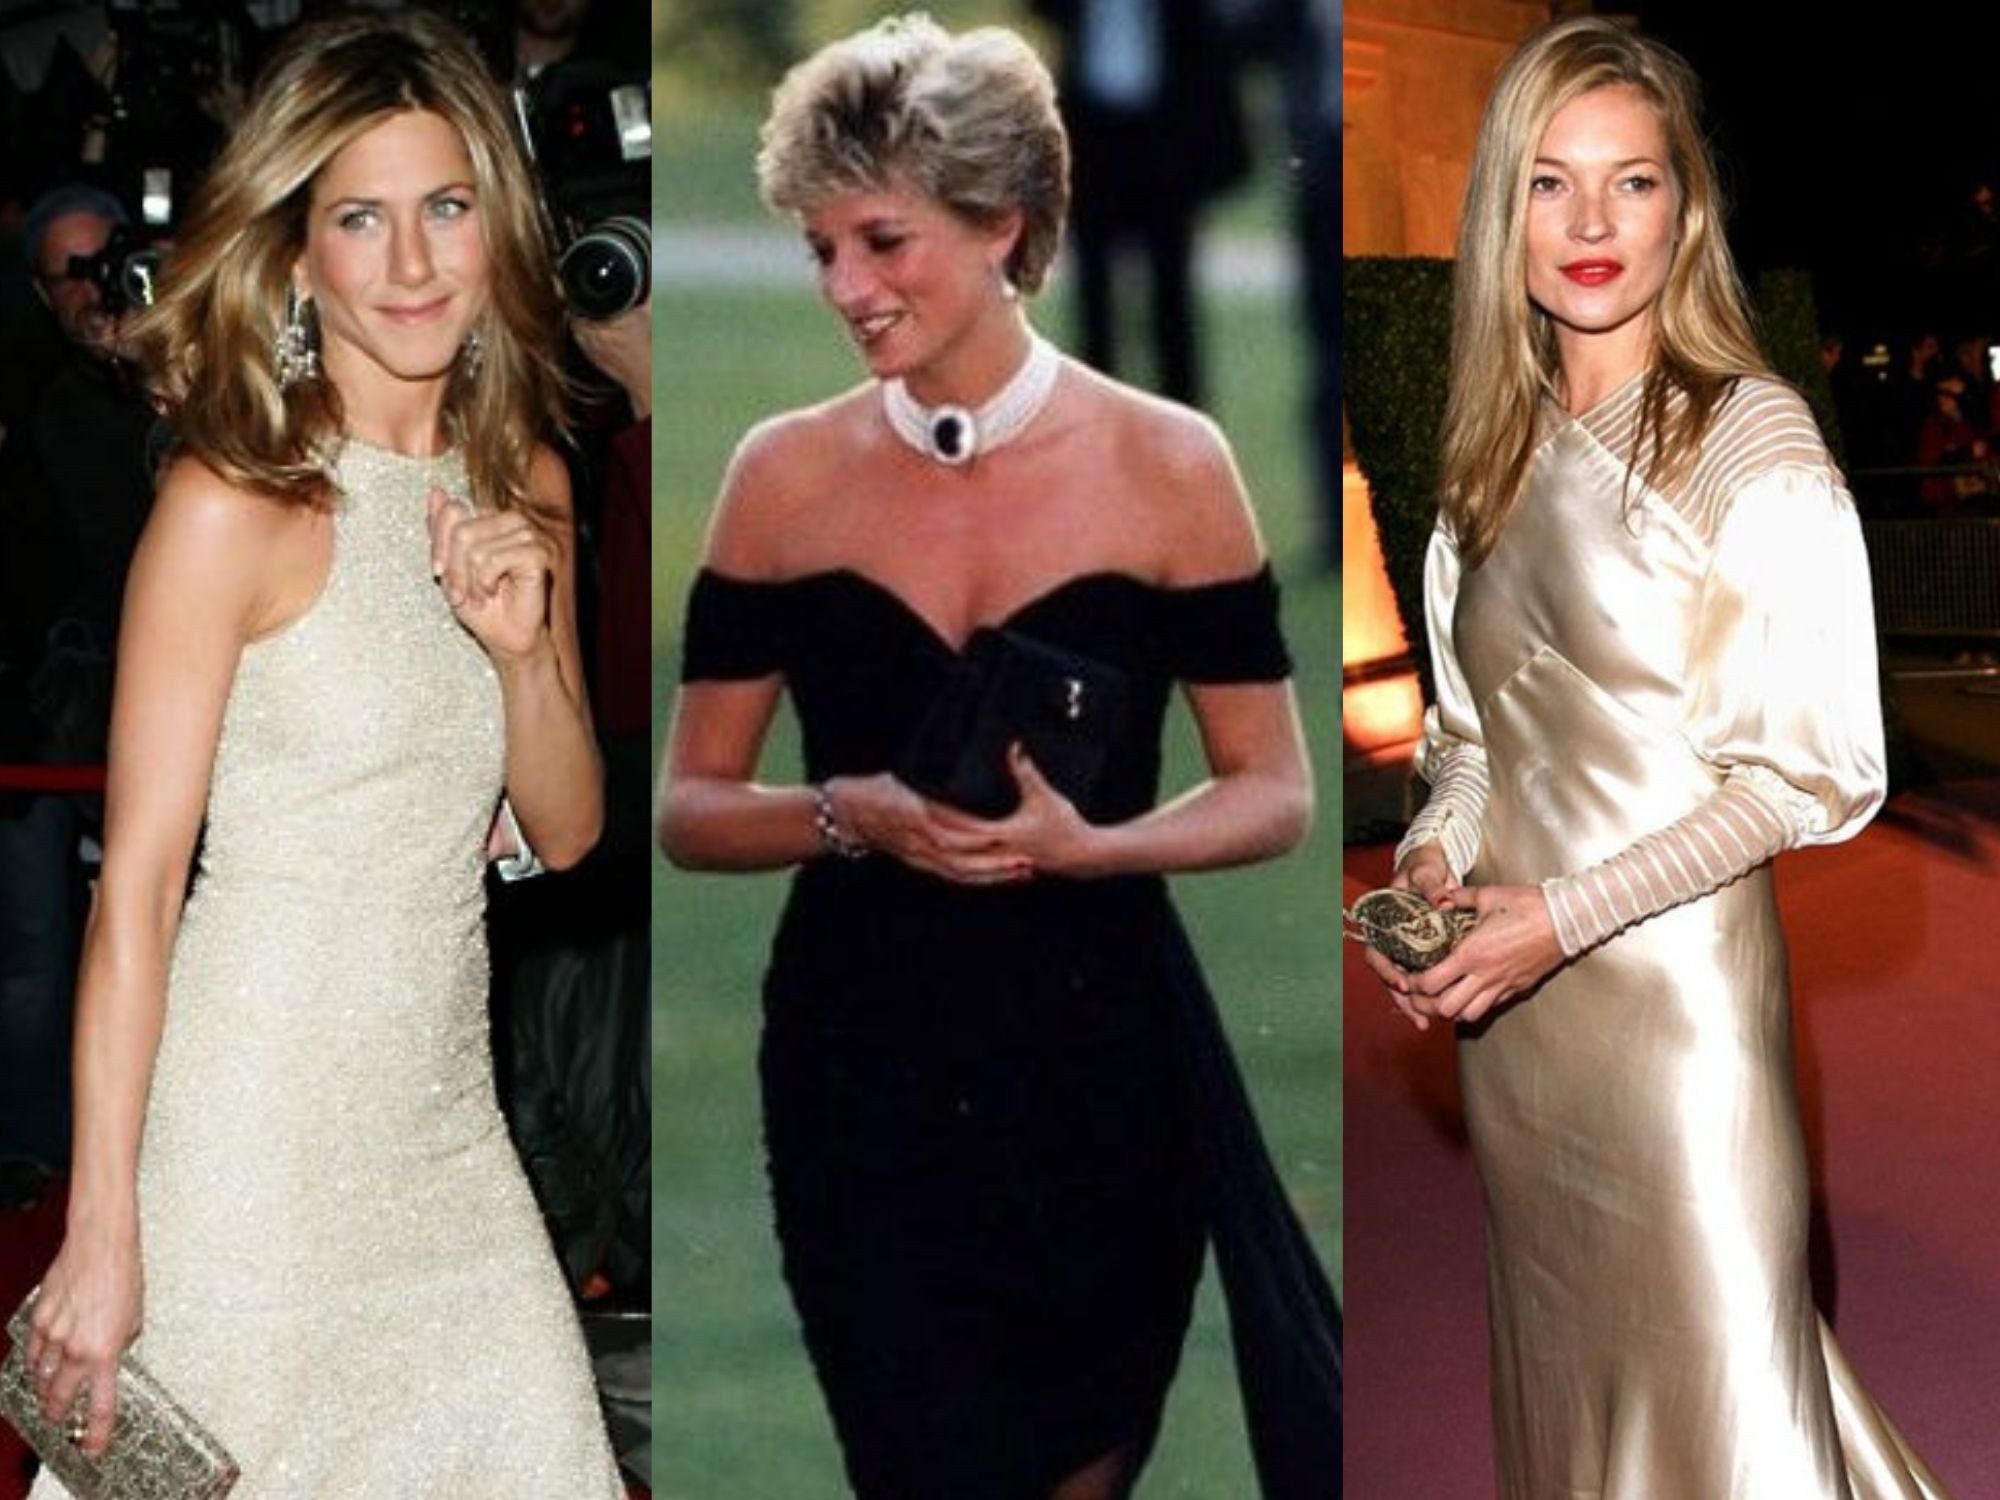 Princess Diana left behind a formidable fashion legacy. But how would she  dress today? | CNN